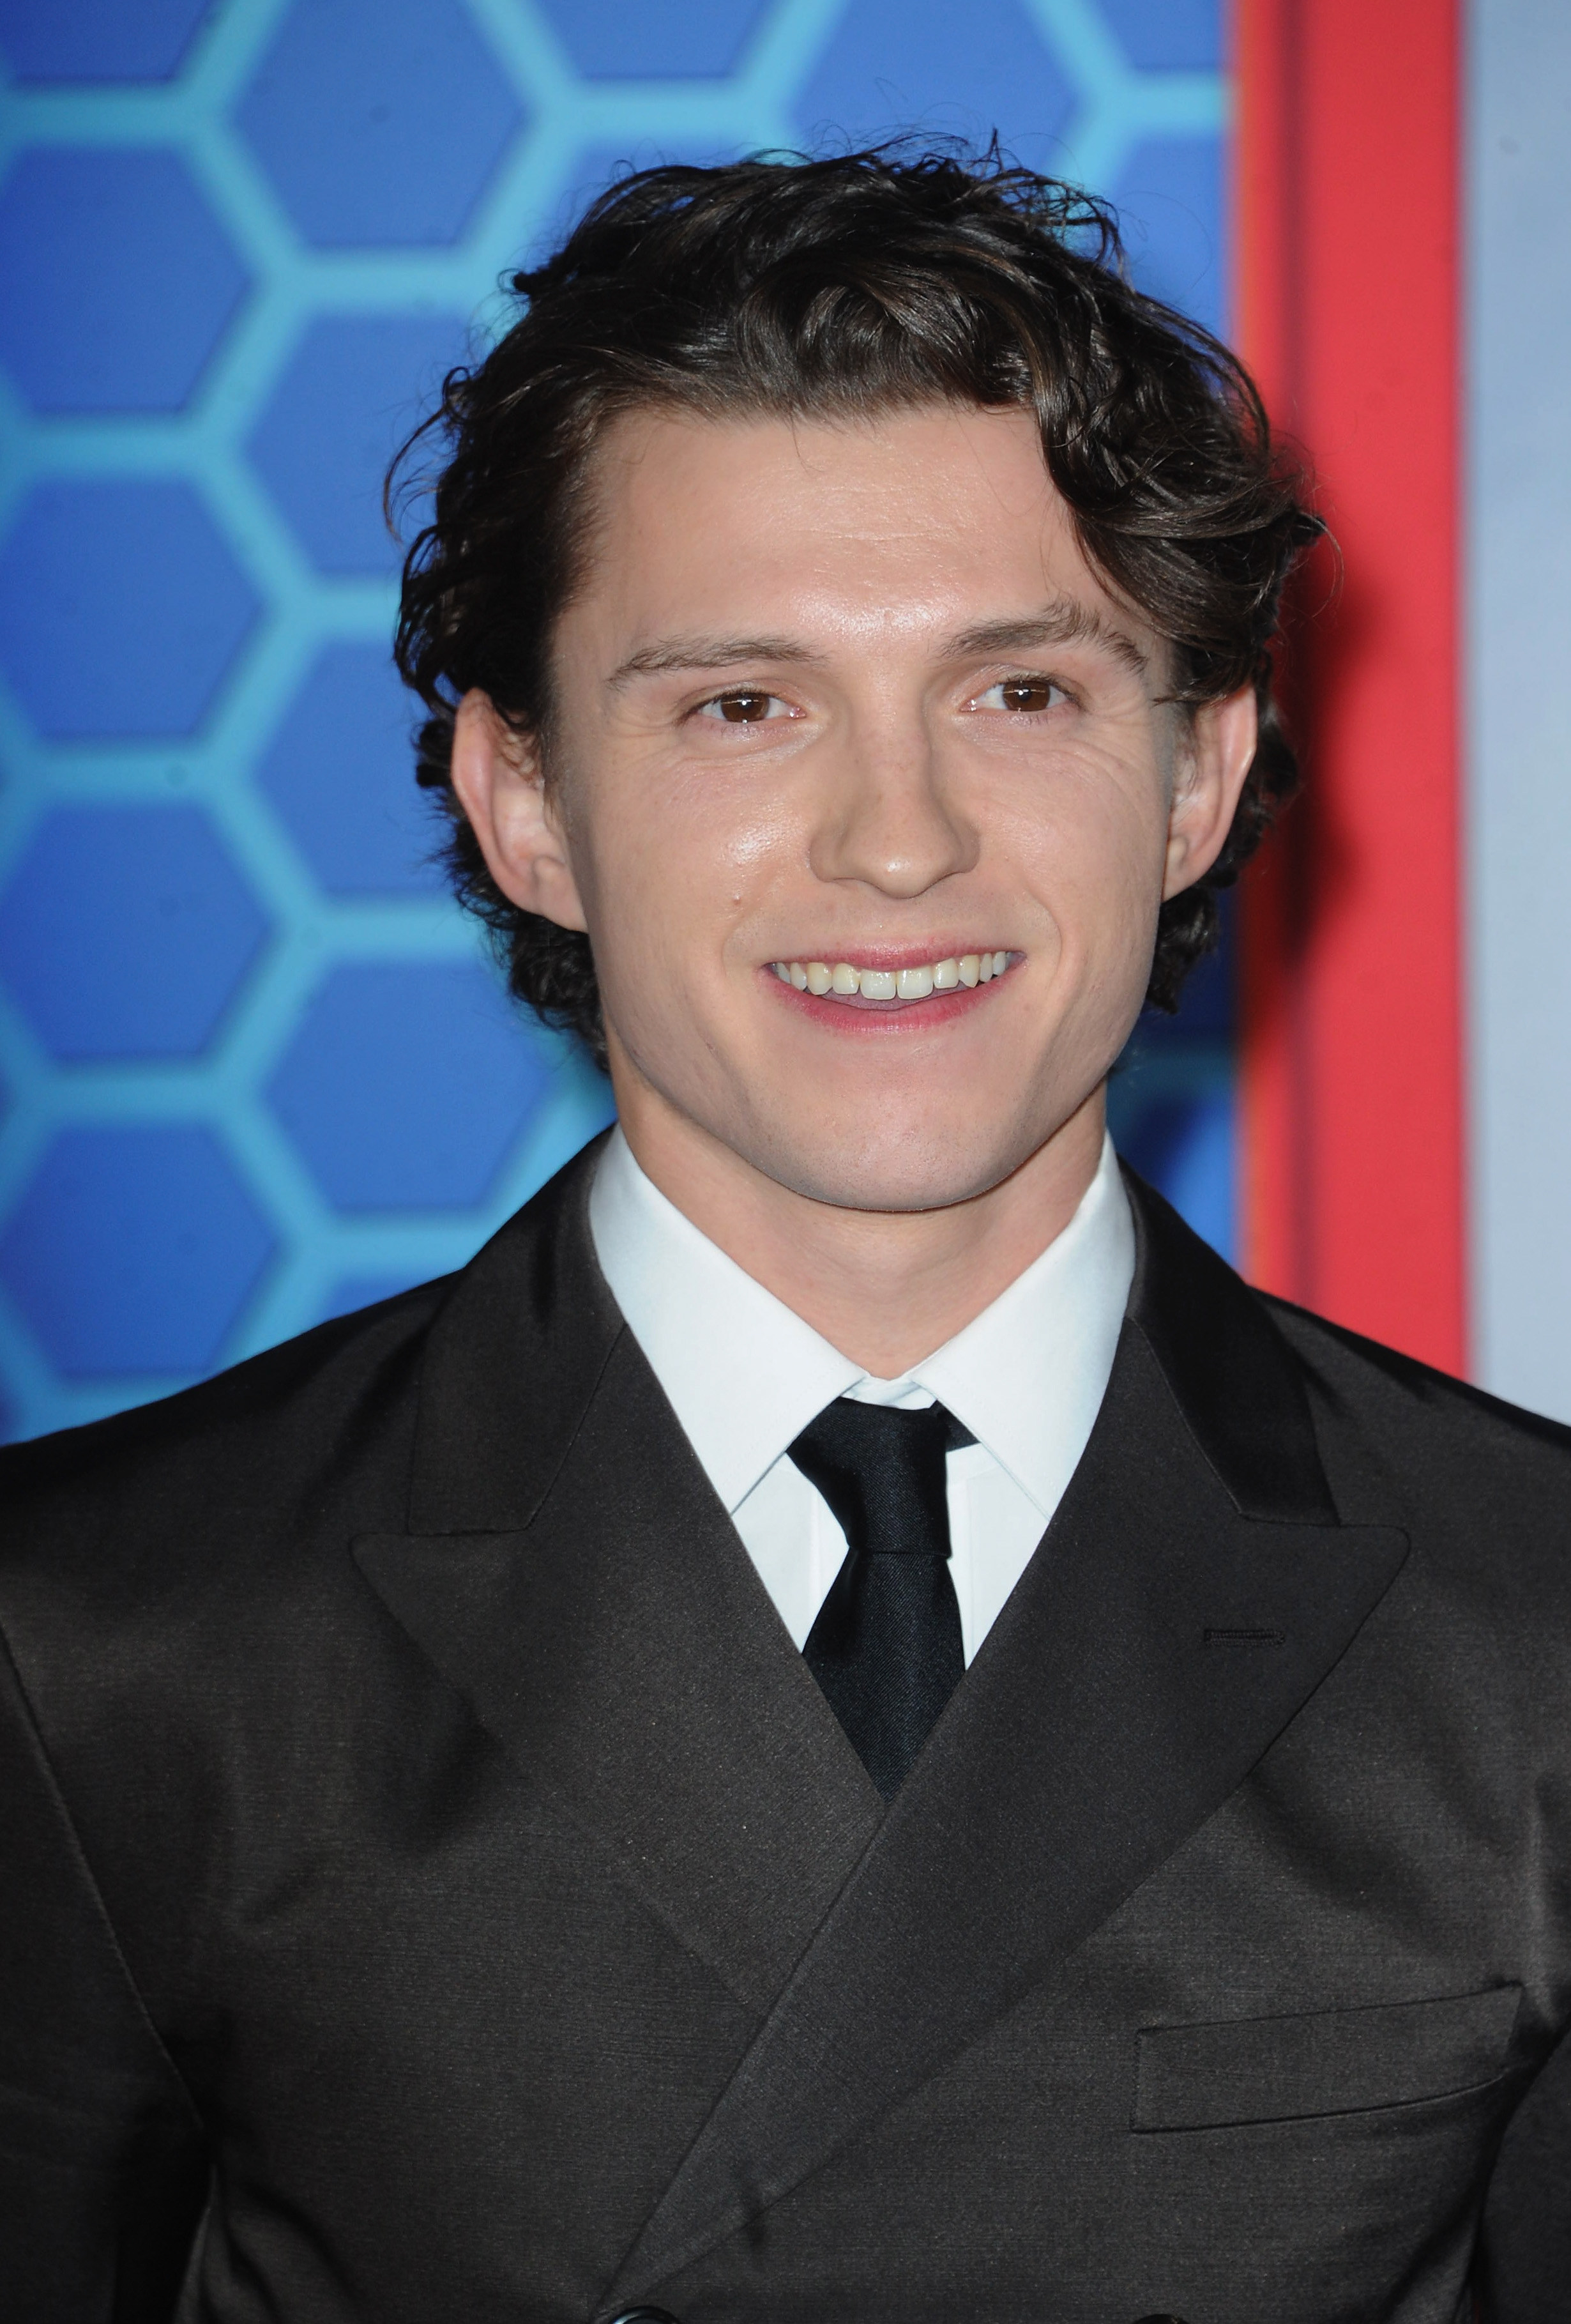 Tom Holland regrets not calling Andrew after replacing him as